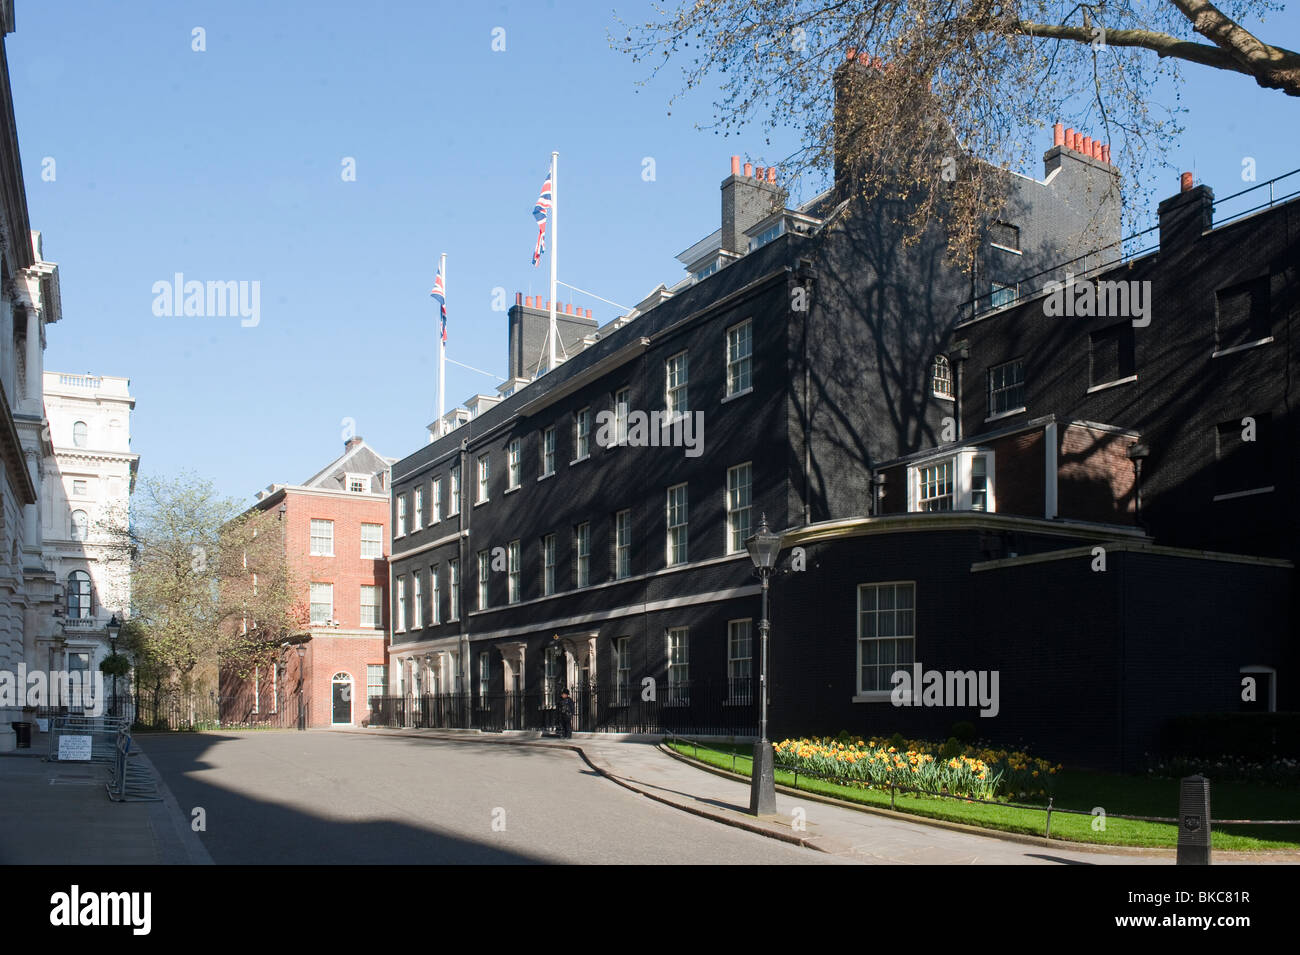 No 10 Downing Street In London England Residence Of The Prime Minister Of Great Britain Stock Photo Alamy